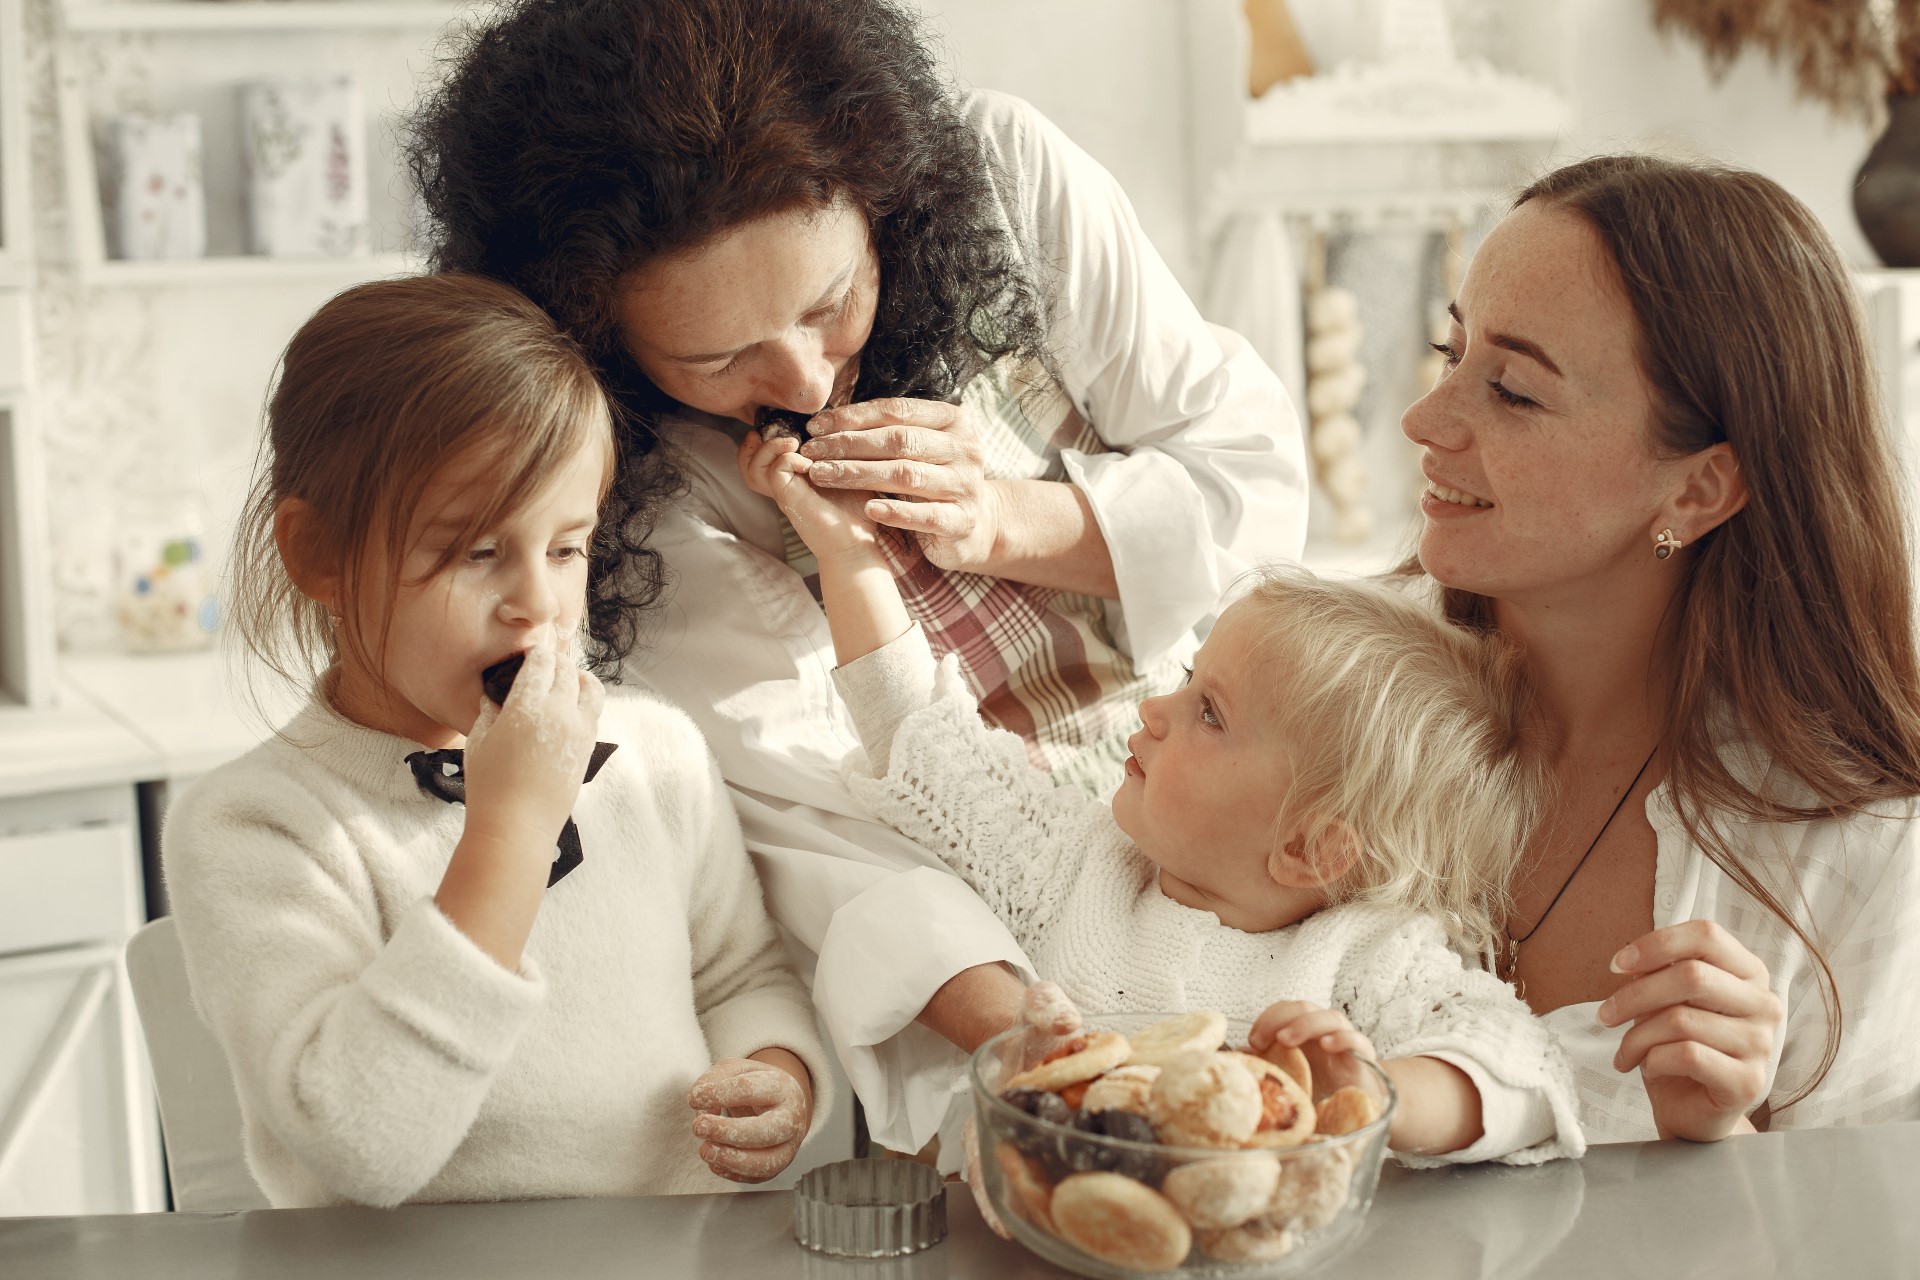 Grandmother, Mother and Two Little Girls in a Kitchen Eating Cookies